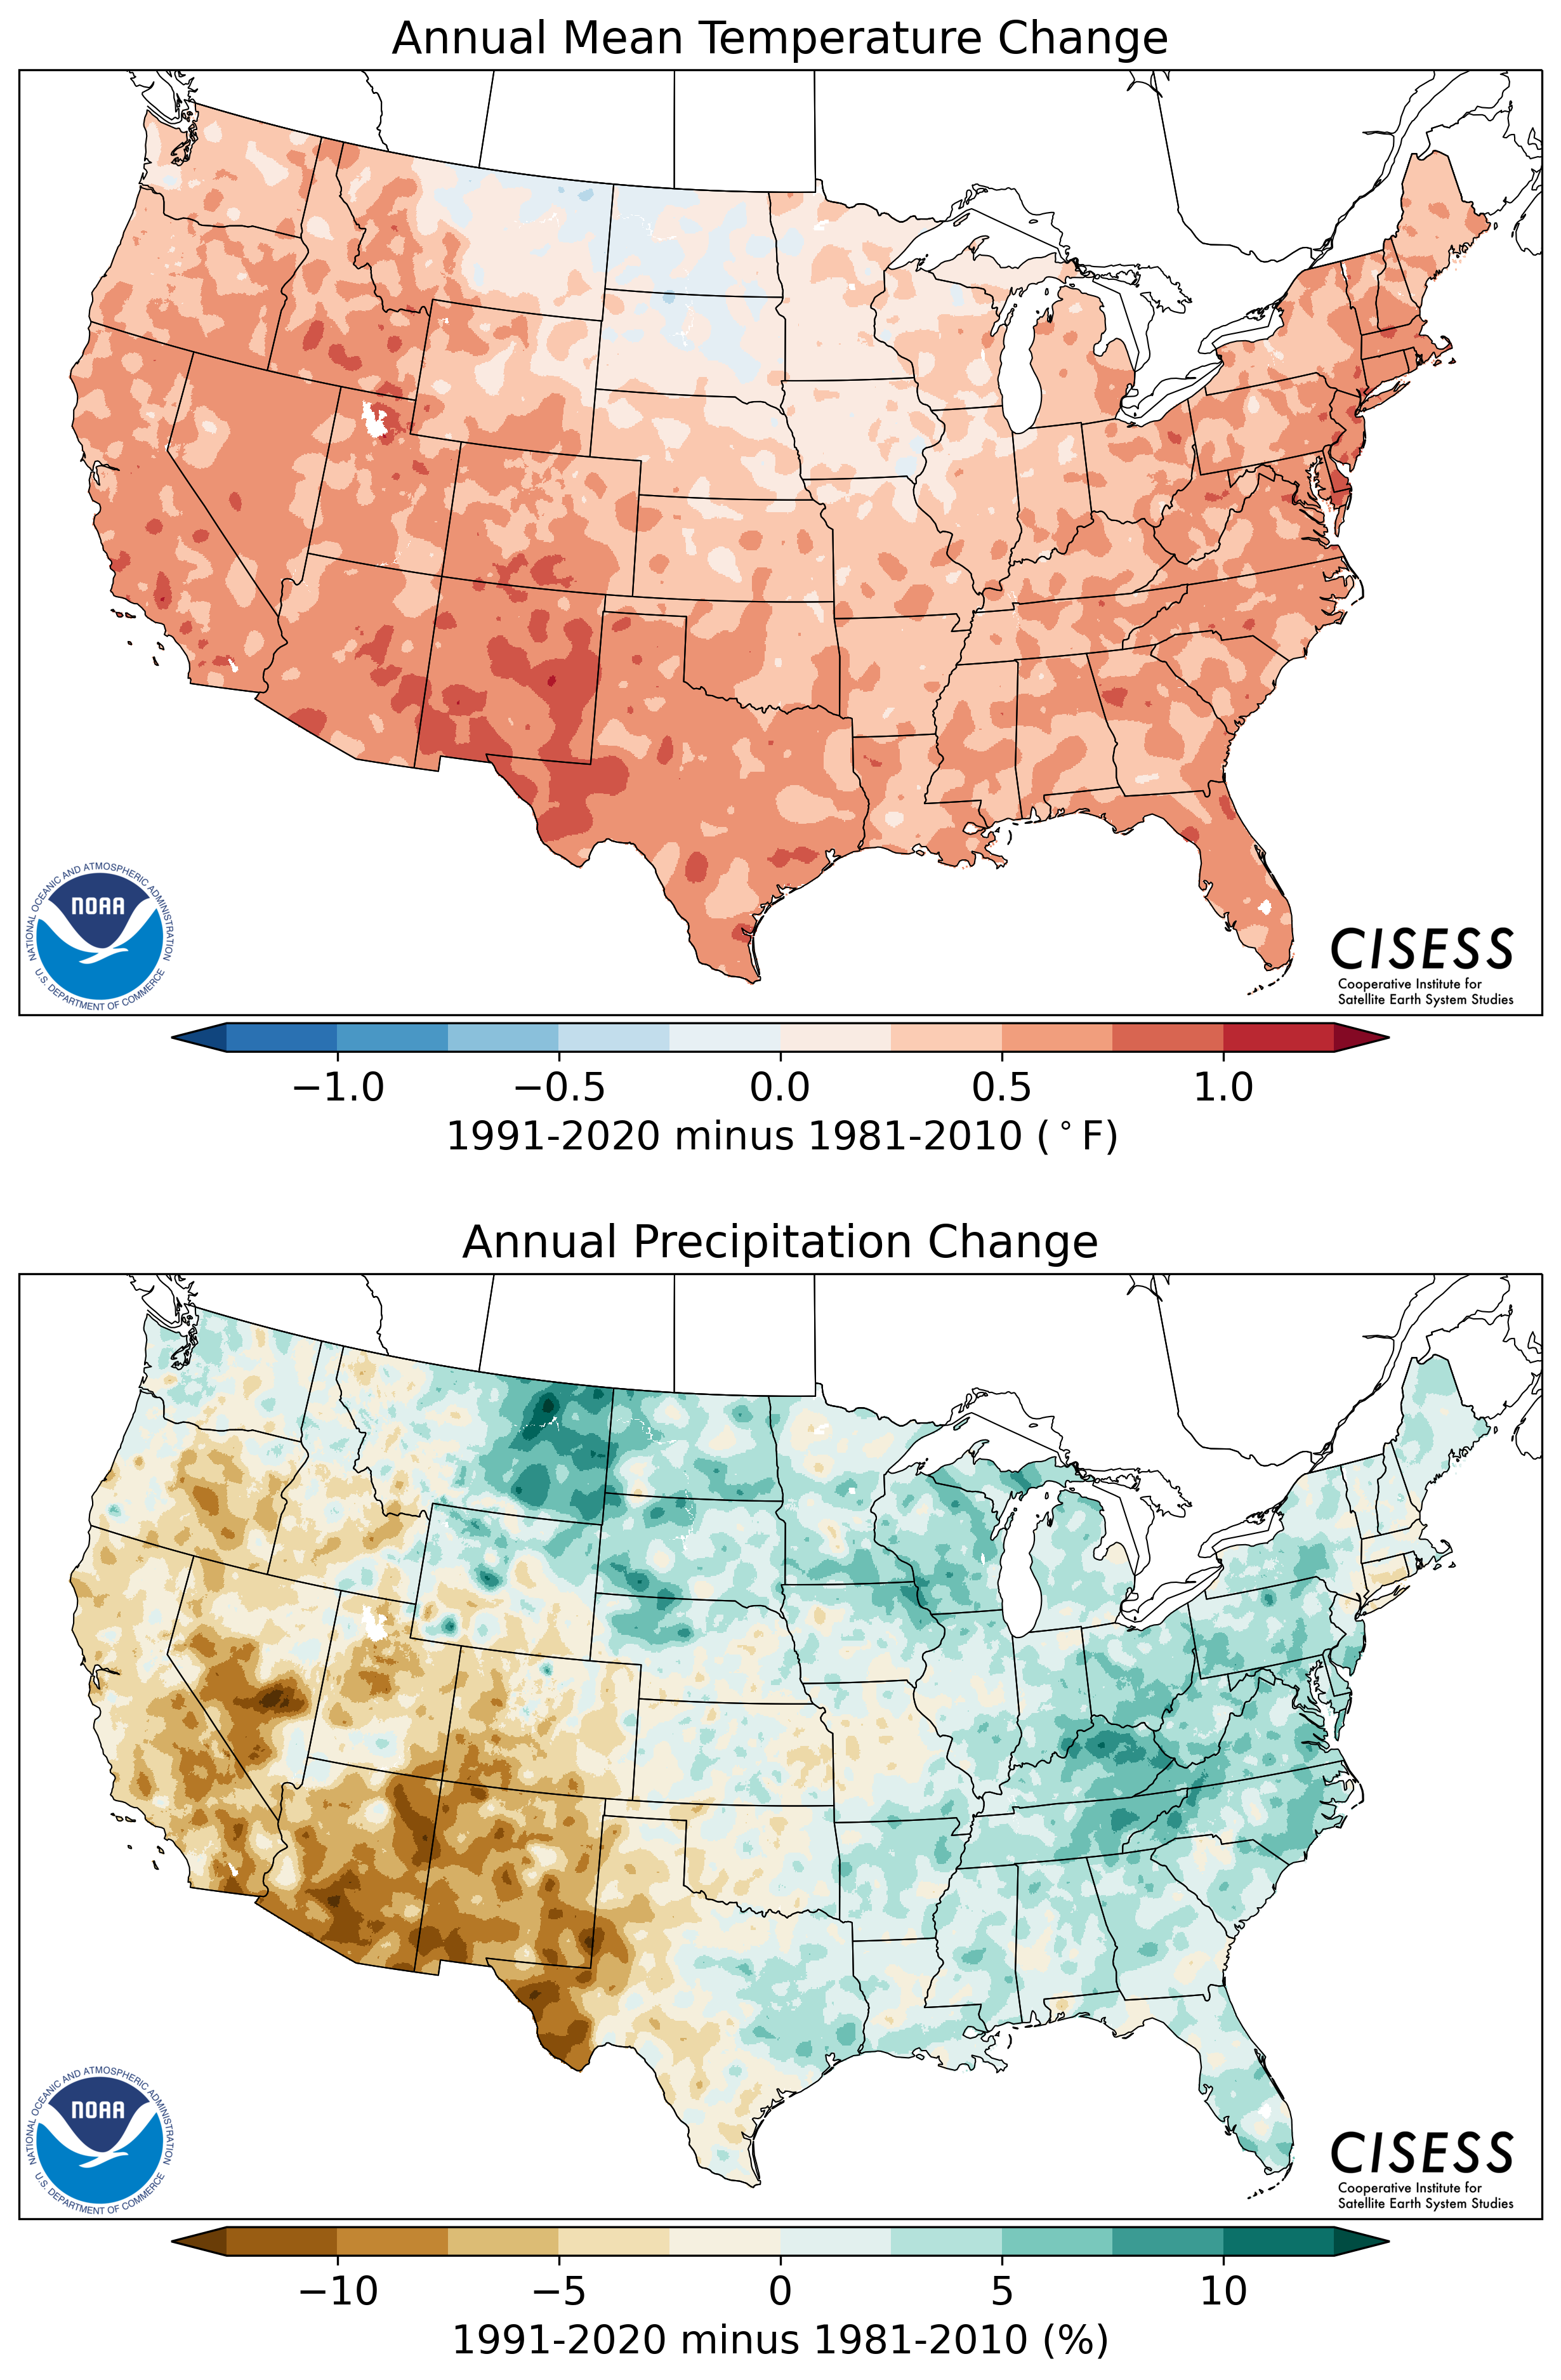 maps comparing 1981-2010 and 1991-2020 climate normals